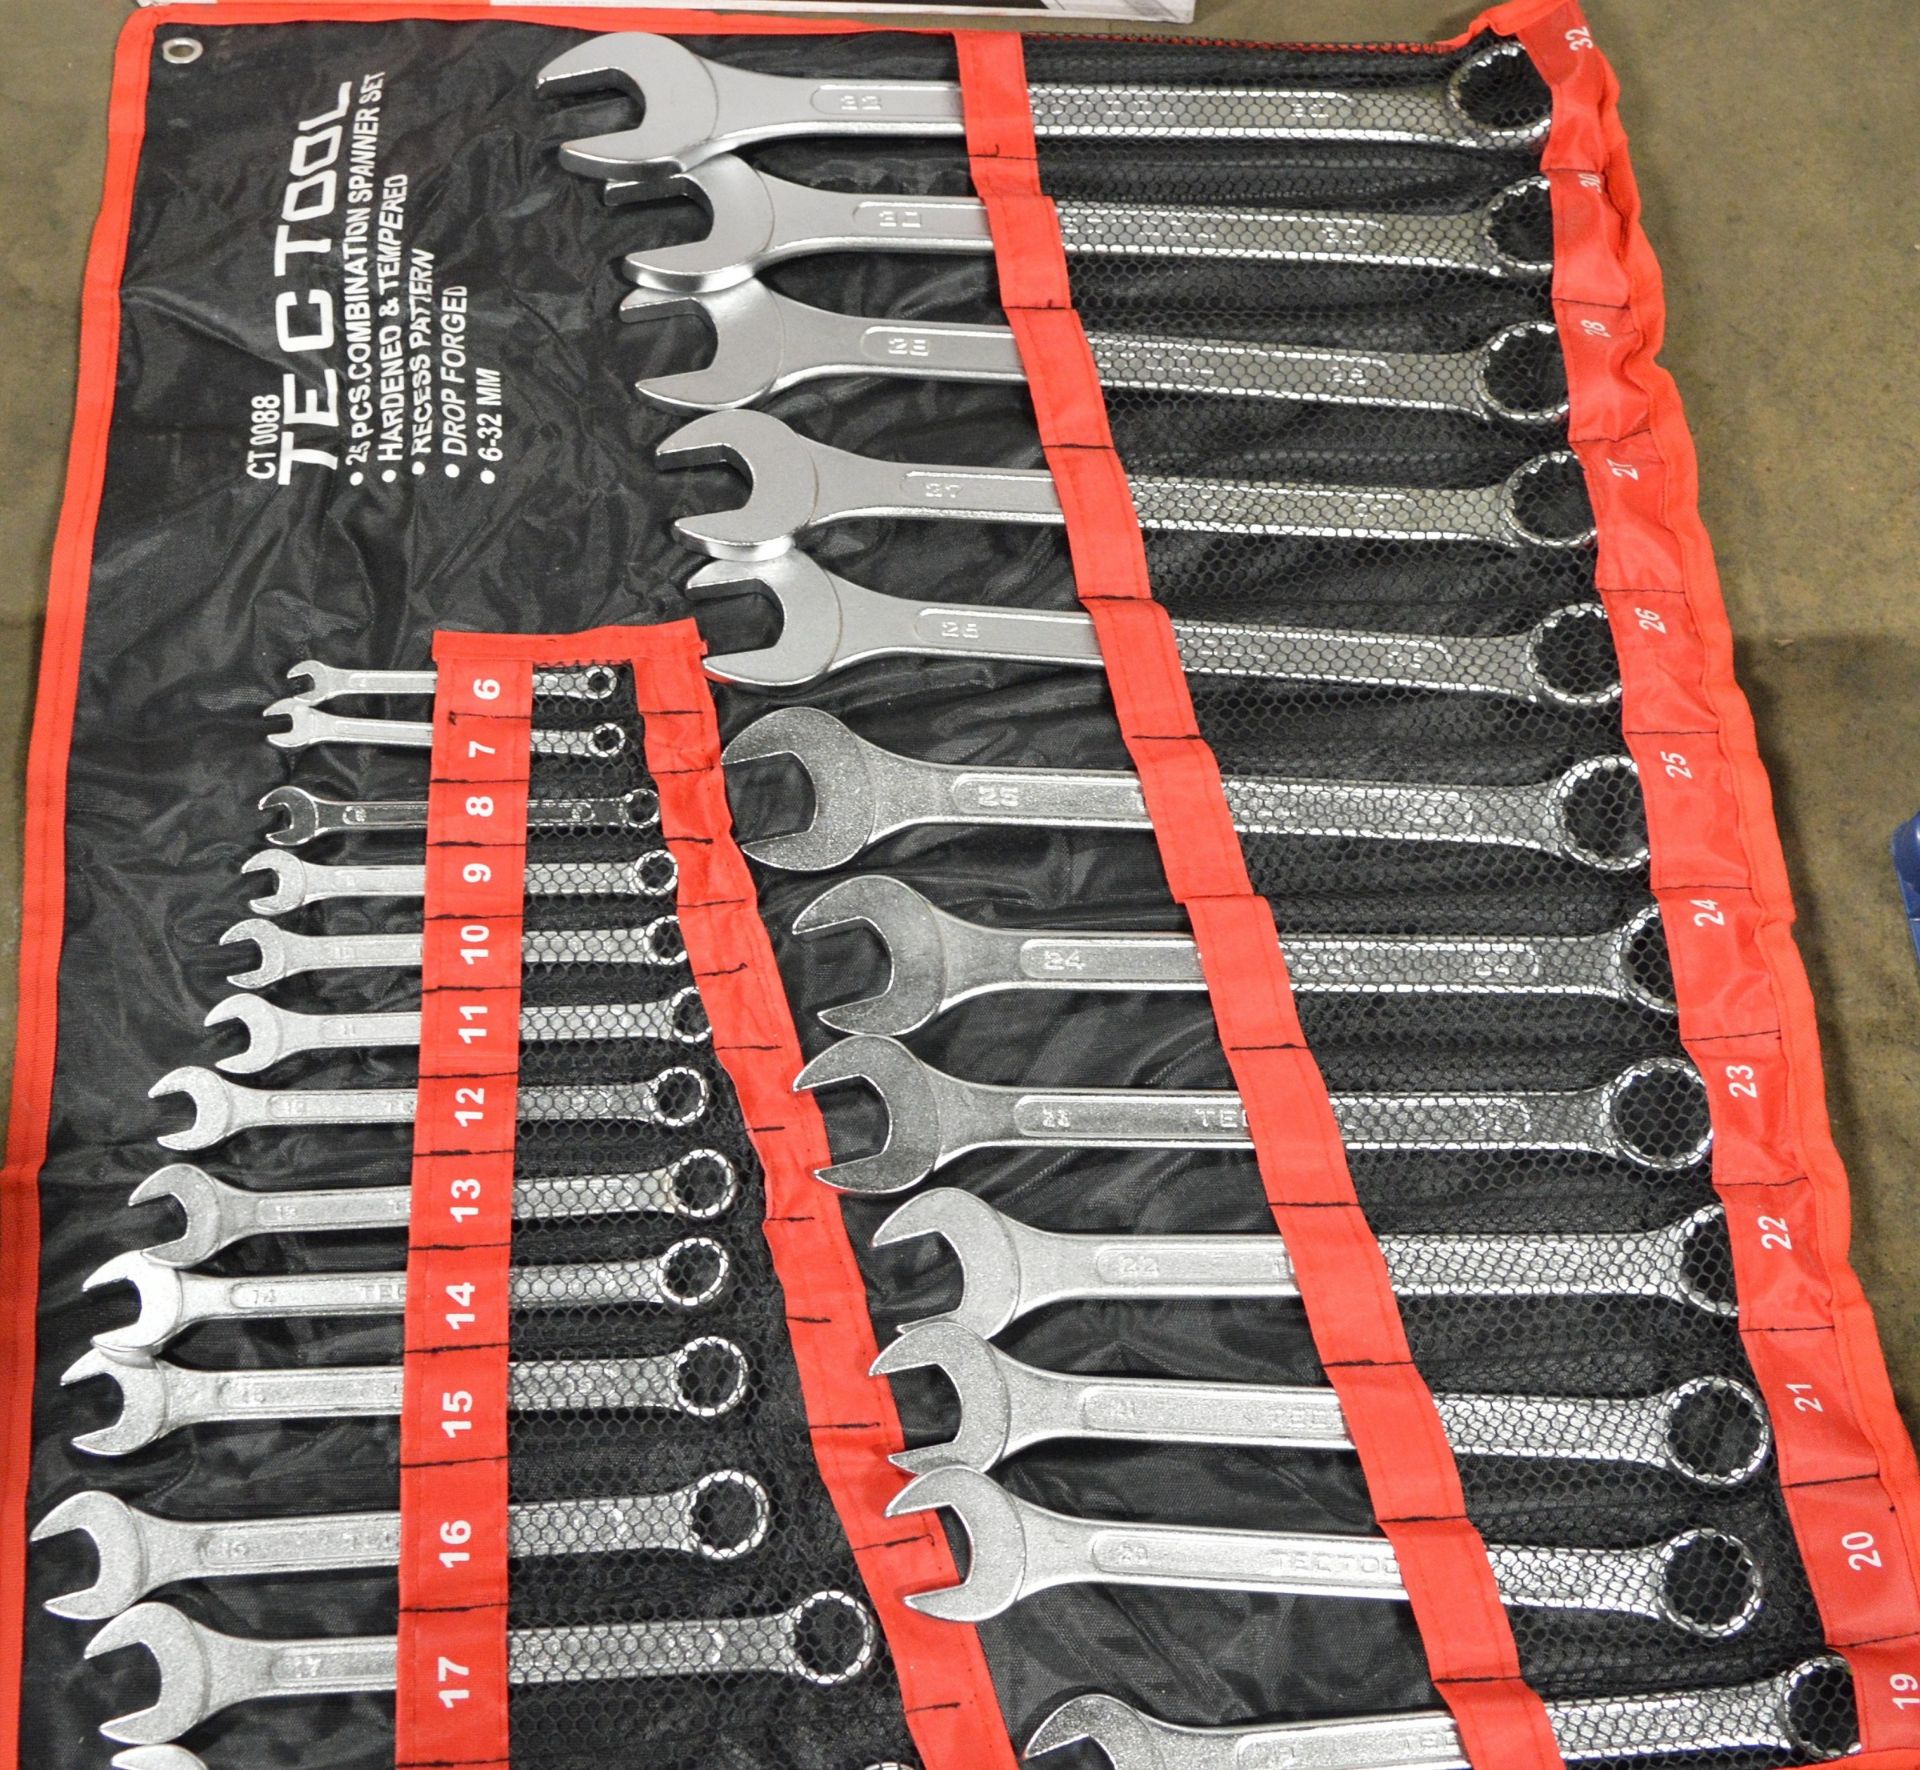 2x Tectool CT0088 25 piece spanner sets - Image 2 of 3